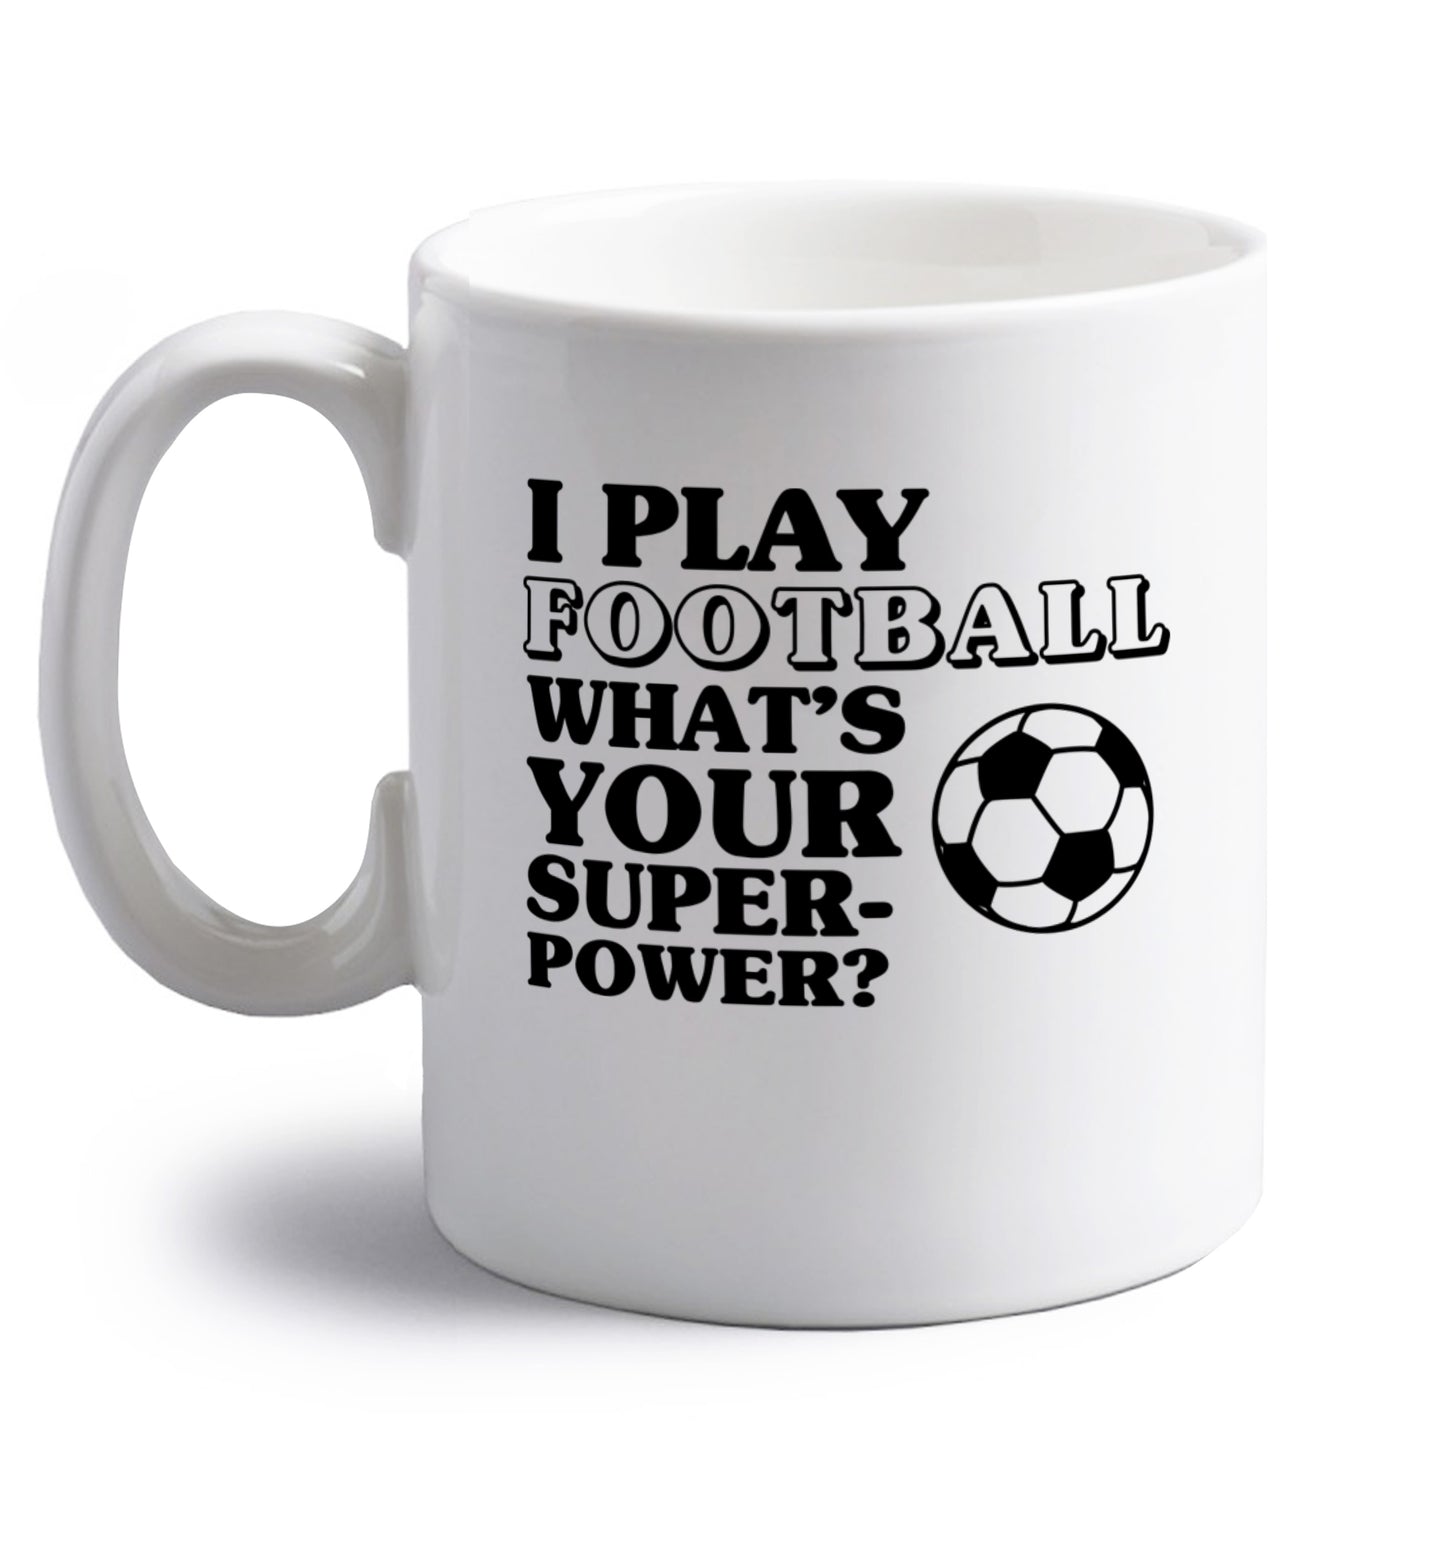 I play football what's your superpower? right handed white ceramic mug 